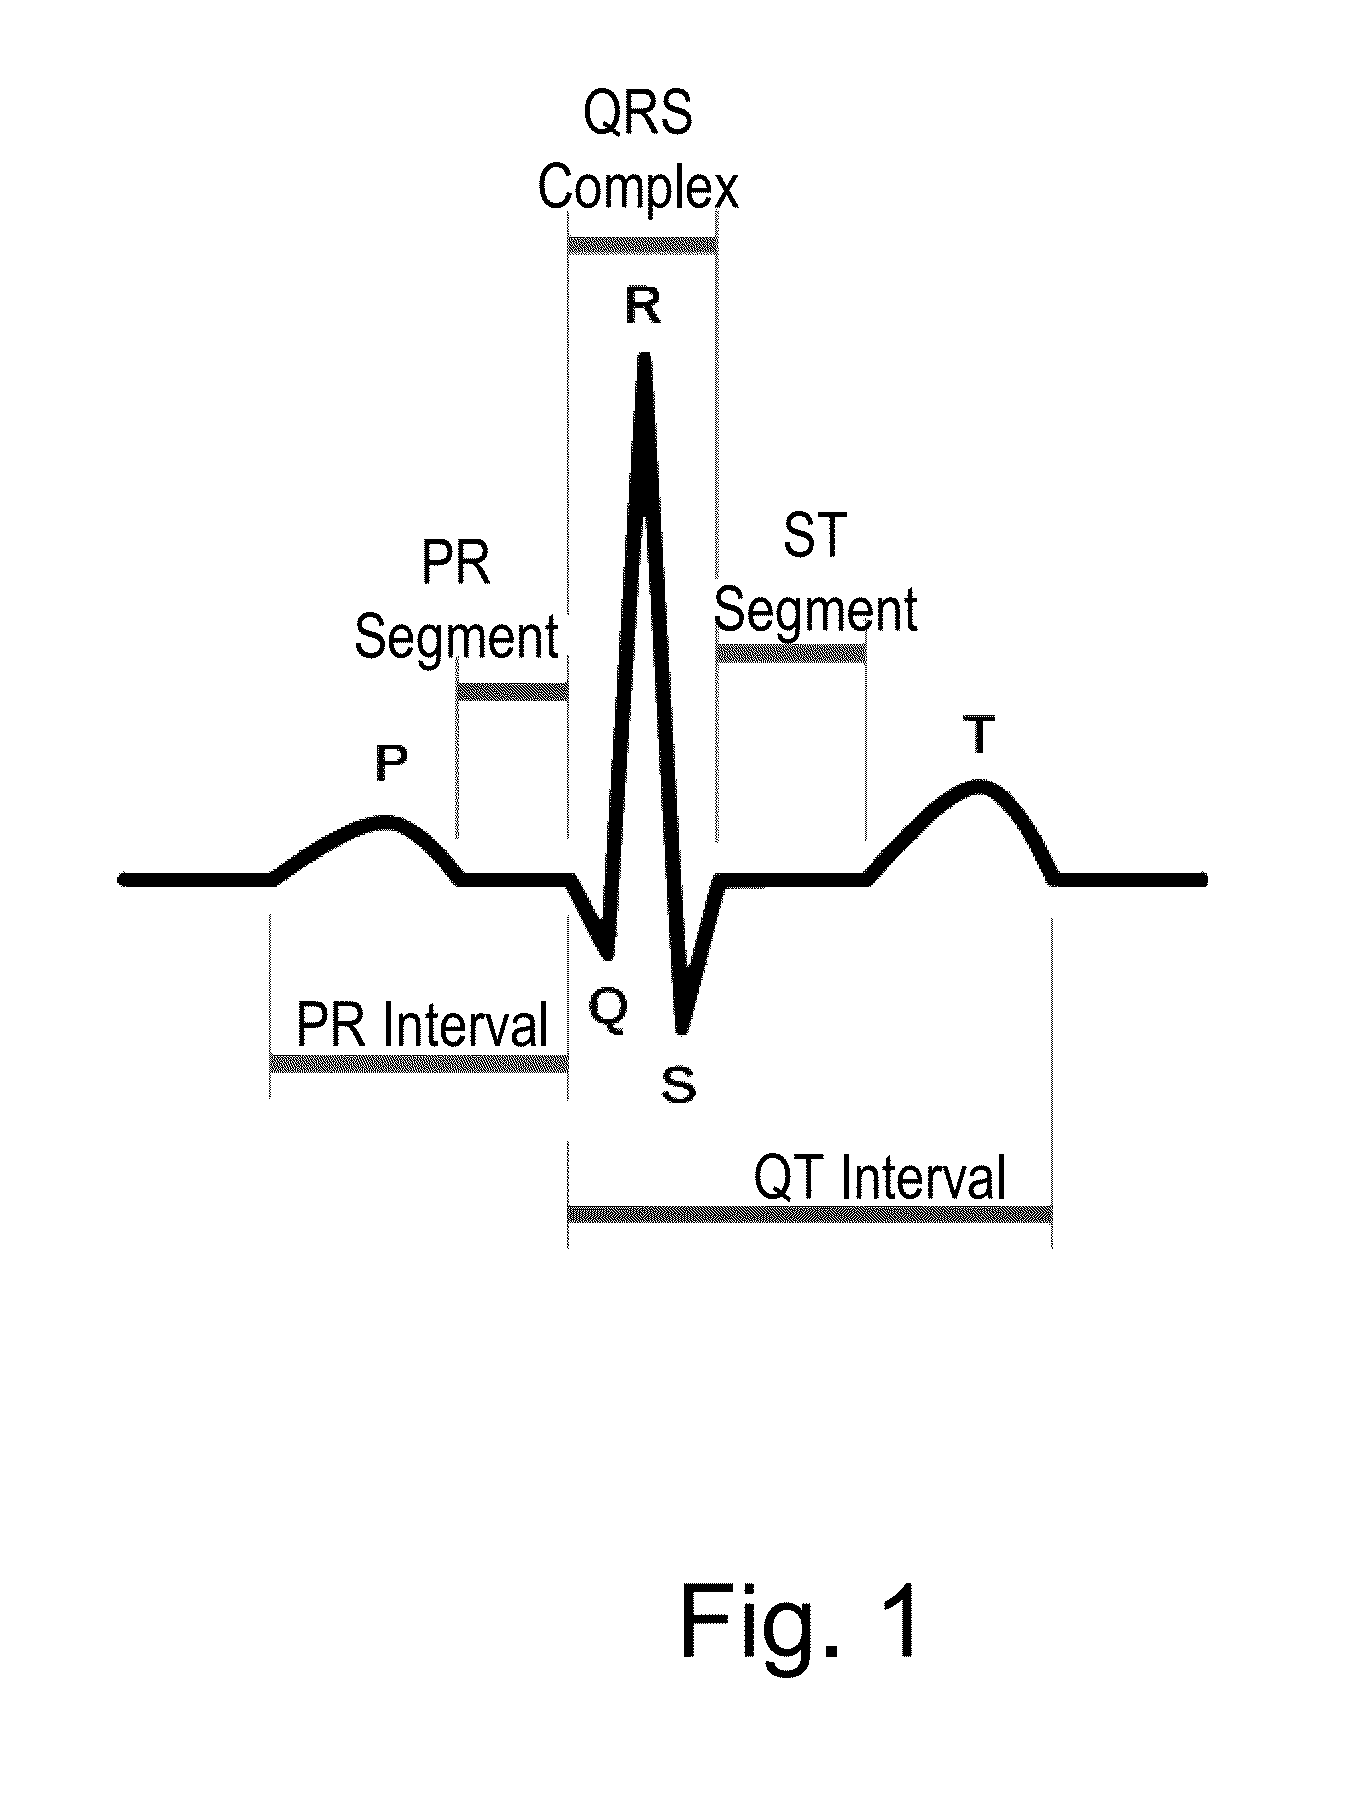 Method and system for detecting P-waves in the surface ECG signal